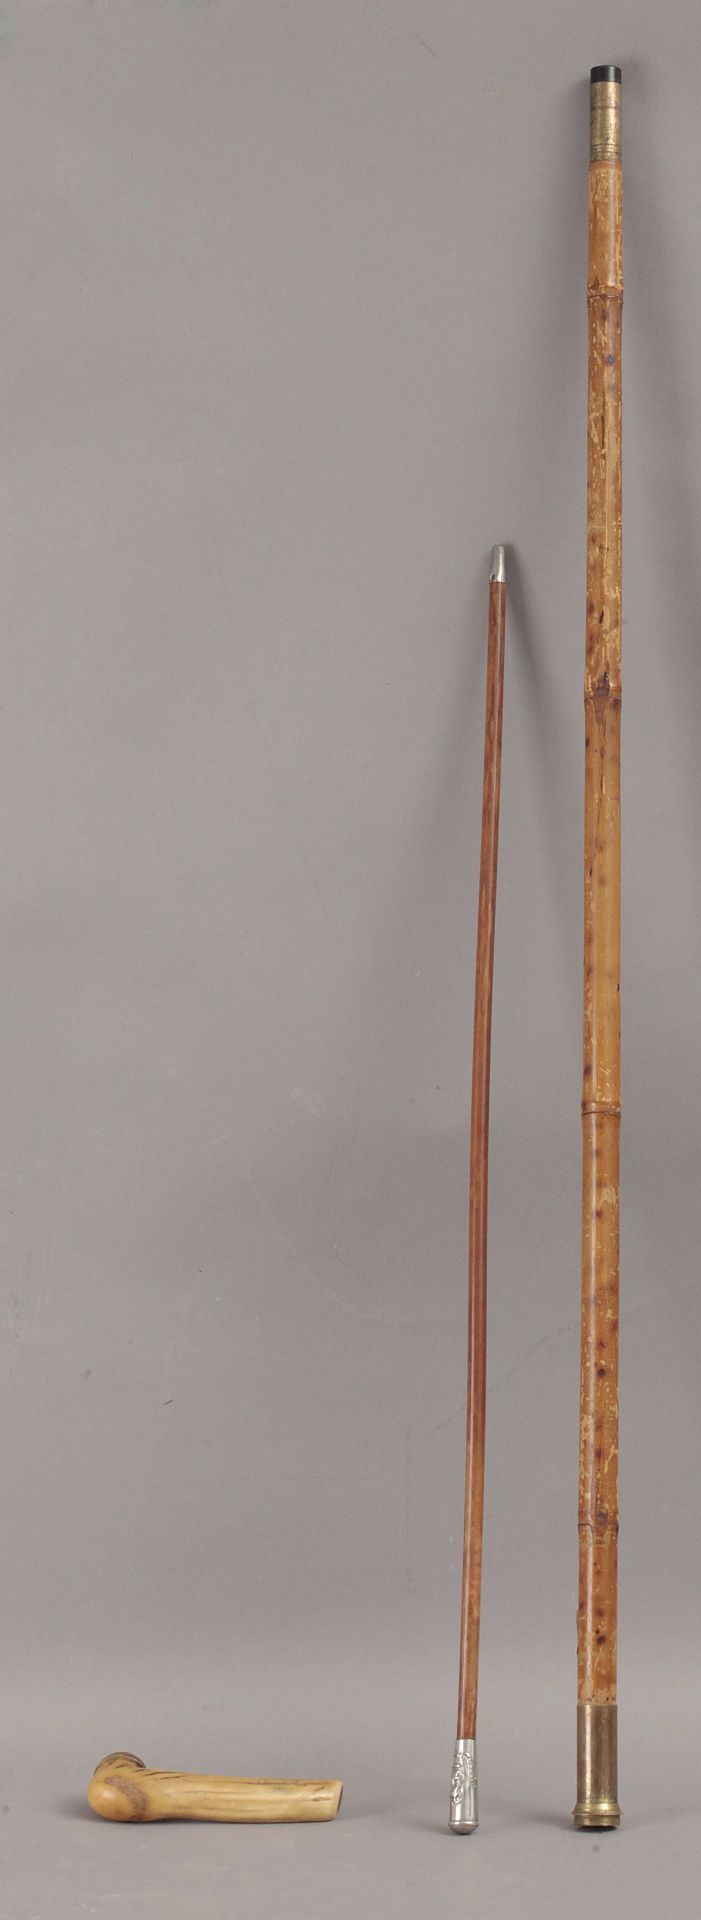 A 19th century walking stick - Image 5 of 8